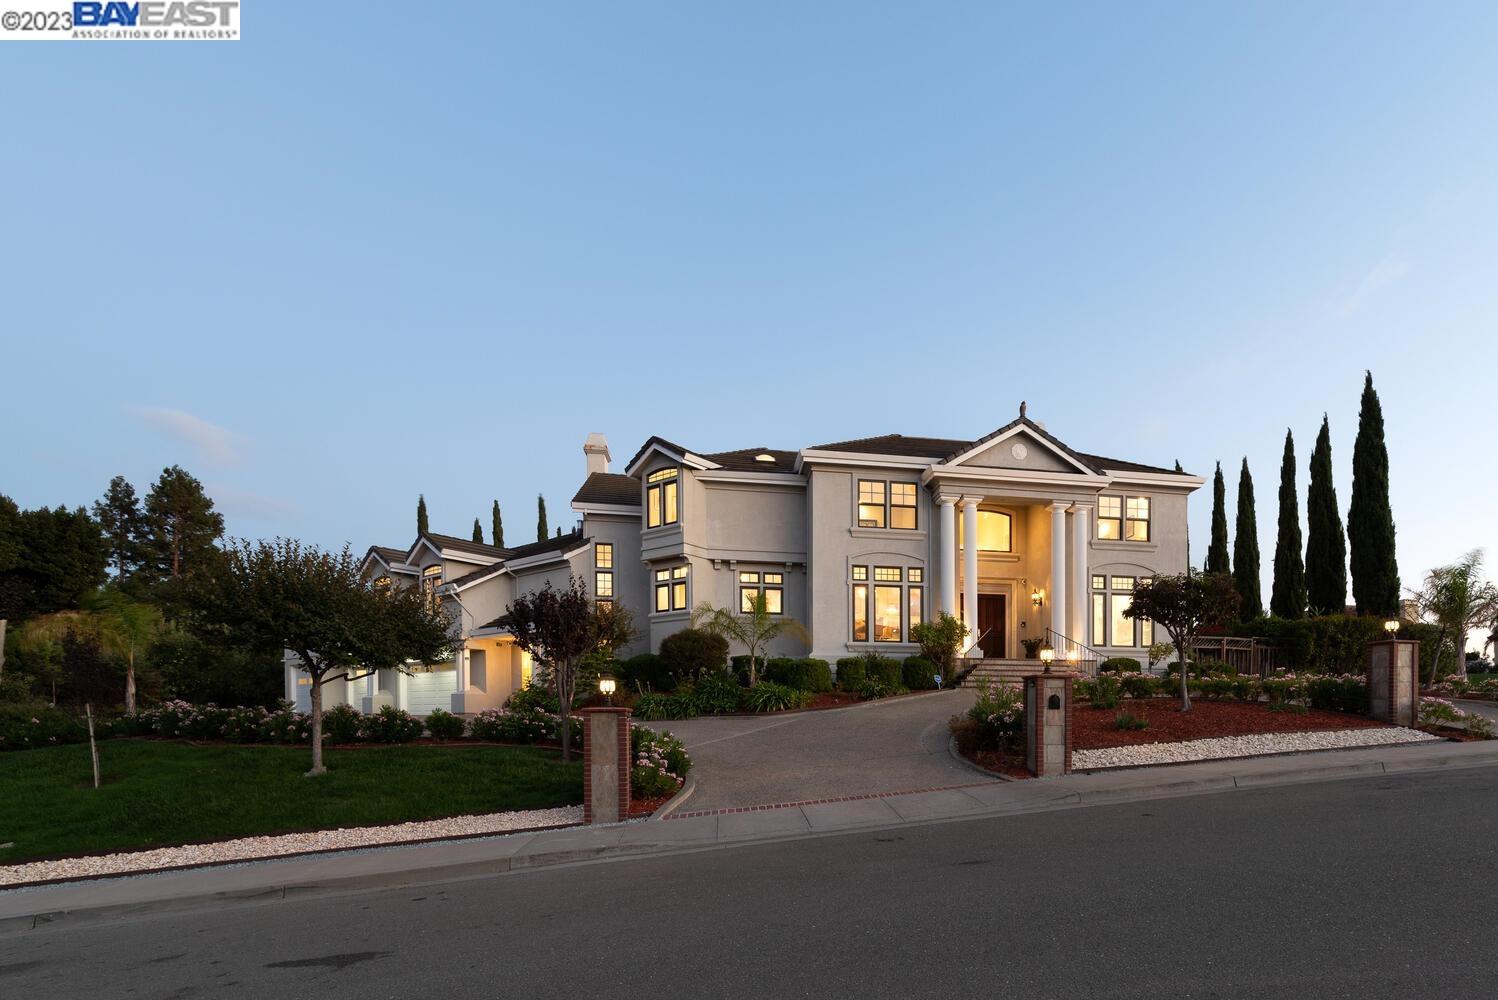 Fall in love w/this luxurious executive home located in the coveted Weibel neighborhood! Situated w/a panoramic view of the hills & bay, this gem is an entertainer’s dream! 5BR/1Office/1Bonus Rm/479s.f Sunroom. Double-door entrance boasts a gorgeous marble flr w/cathedral ceiling & elegant chandelier. Living rm offers large windows, natural light & fireplace. Gourmet kitchen features granite c-top, full backsplash, viking 6-burner gas cooktop, built-in fridge, brand new double ovens, large island, bay window, recessed lights. Cozy family rm w/built-in shelves & fireplace. Separate formal dining rm. Office w/built-in bookshelves. Spacious master suite features large walk-in closet, private balcony, master bath w/walk-in shower w/body jets, oversized jacuzzi tub, dual vanity, tile flr. Bonus rm w/French doors leads to beautiful yard w/new lawn, lovely plants & fruit trees. Large sunroom w/permit offers new carpet. Hardwood flr in kitchen & nook. New interior paint. Dual-pane windows & sliders, central vacuum sys & central heating/AC. Spacious laundry rm w/sink, cabinets, laundry chute. Attached 4-car garage. Distinguished Weibel Elementary, Horner Jr High, Irvington High. Convenient location close to Mission Peak, markets, and restaurants. EZ access to I-880 & I–680. Welcome Home!